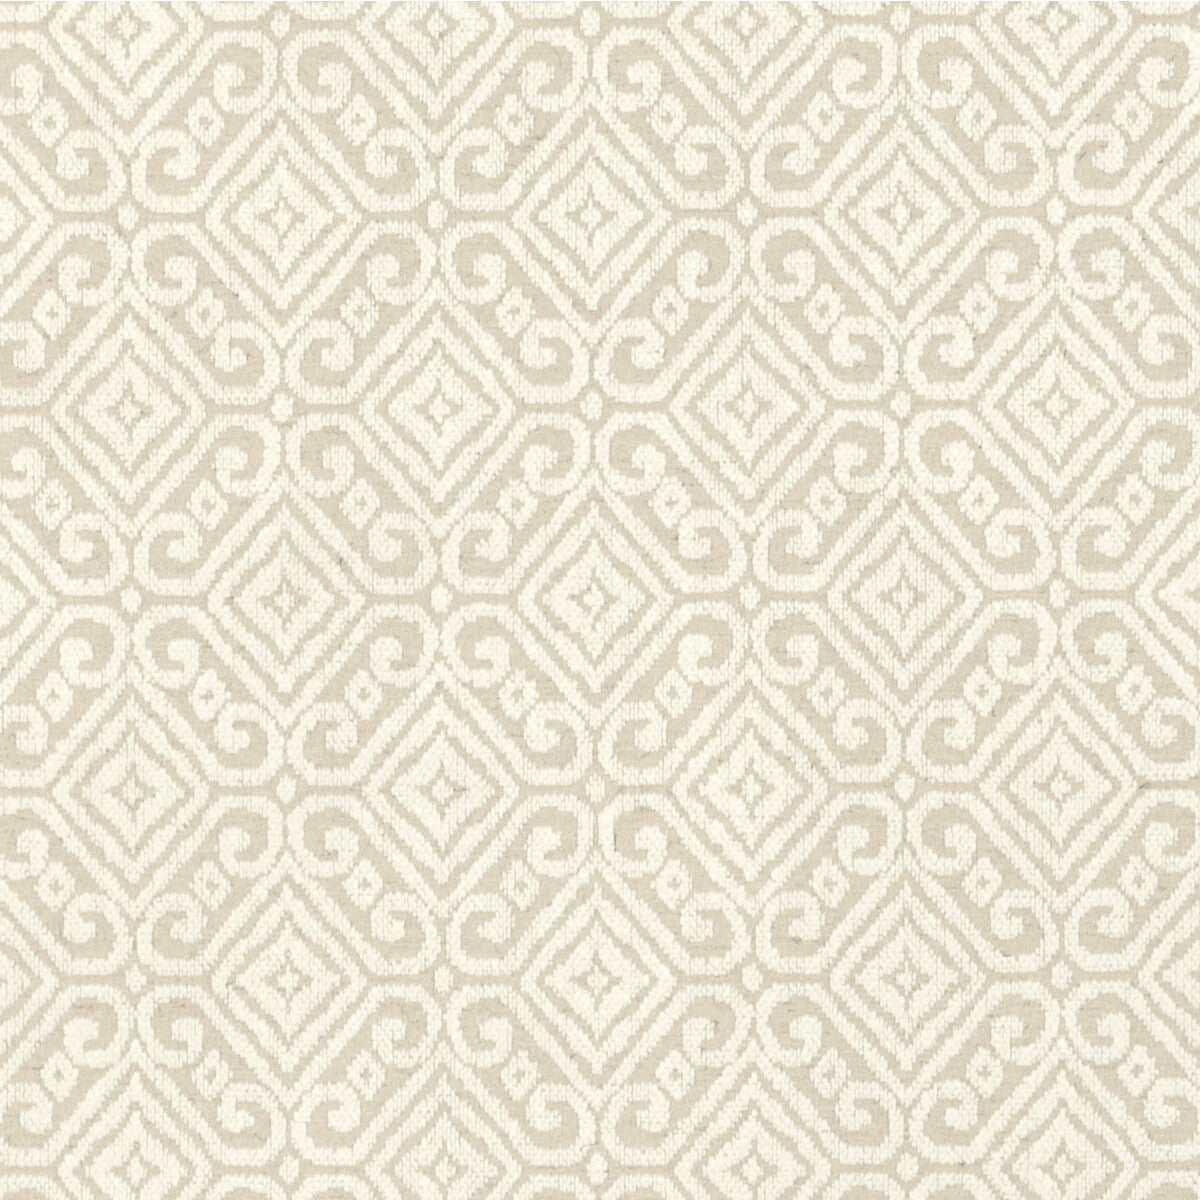 Prado Weave fabric in pearl color - pattern 2021106.1.0 - by Lee Jofa in the Triana Weaves collection